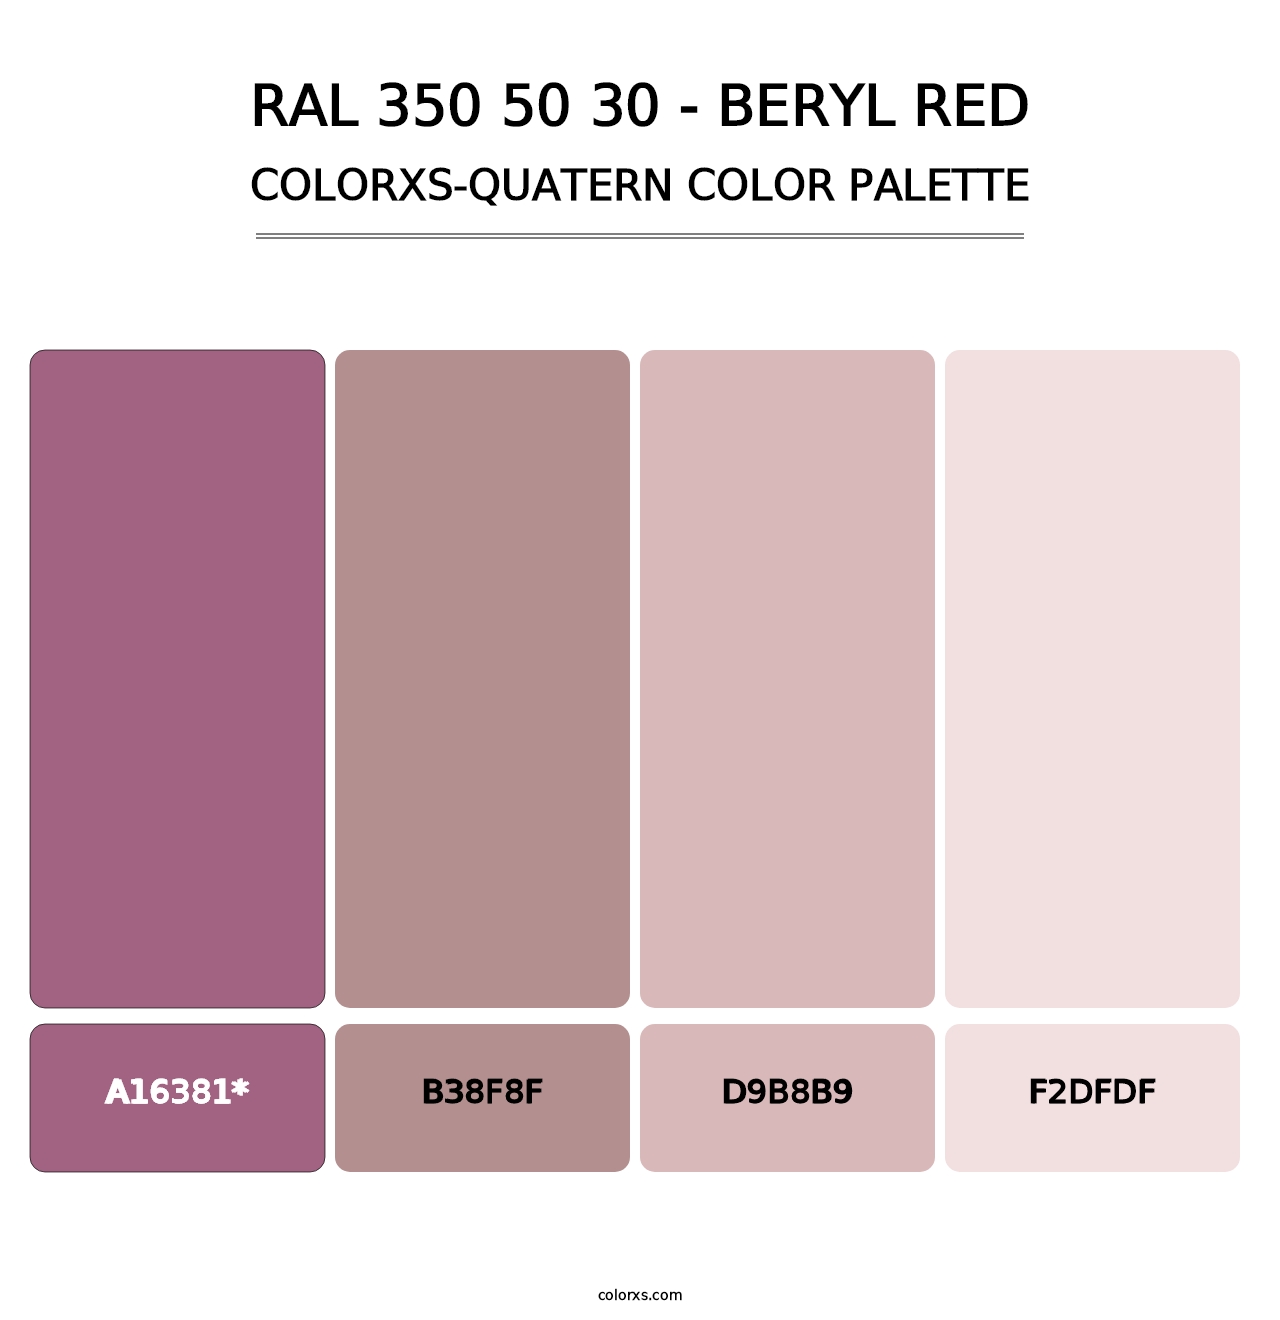 RAL 350 50 30 - Beryl Red - Colorxs Quatern Palette